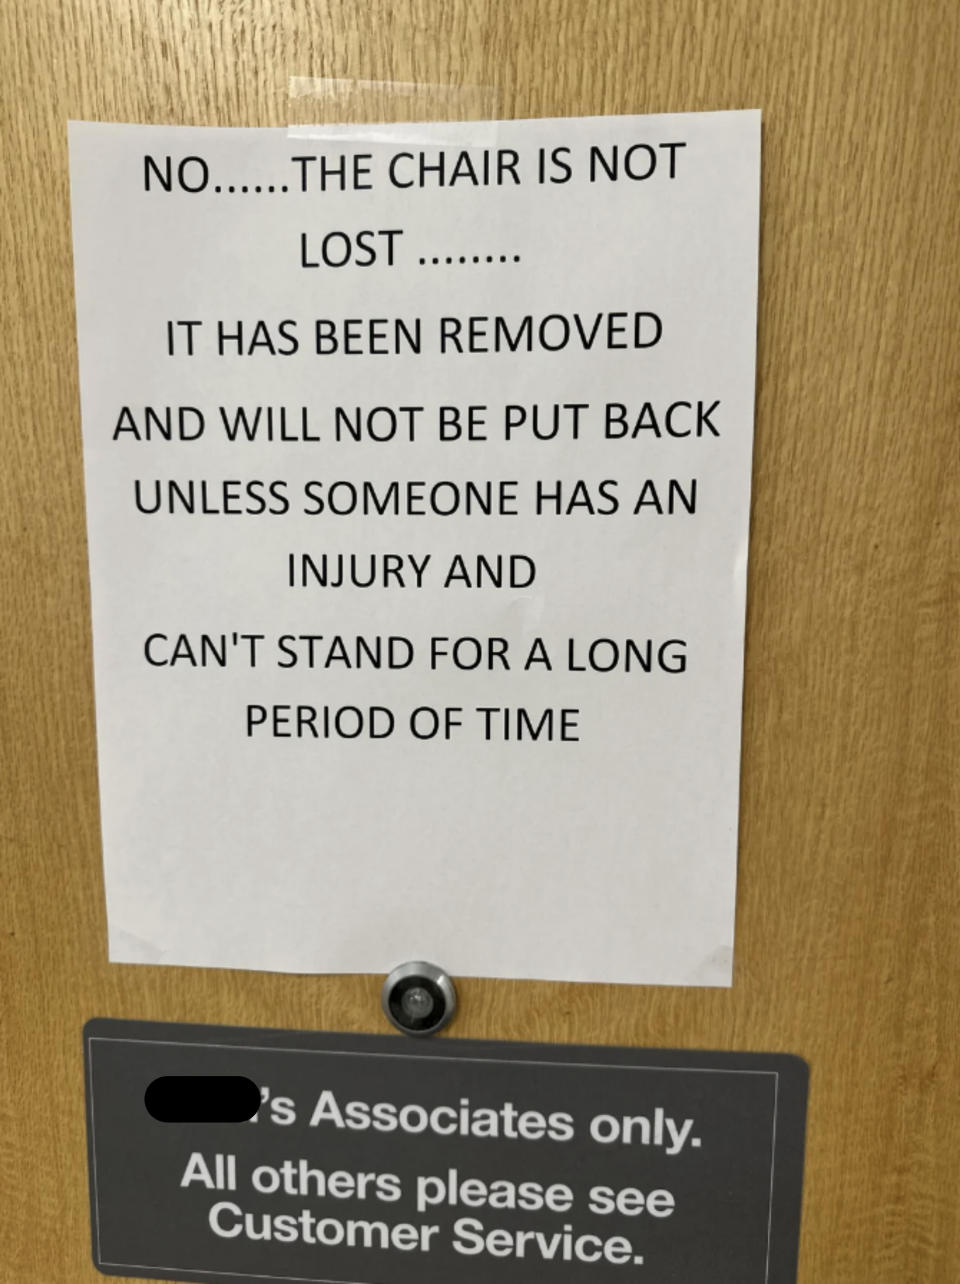 Sign on a door reads: "The chair is not lost. It has been removed and will not be back until someone has an injury for a period of time. Kohl's Associates only."